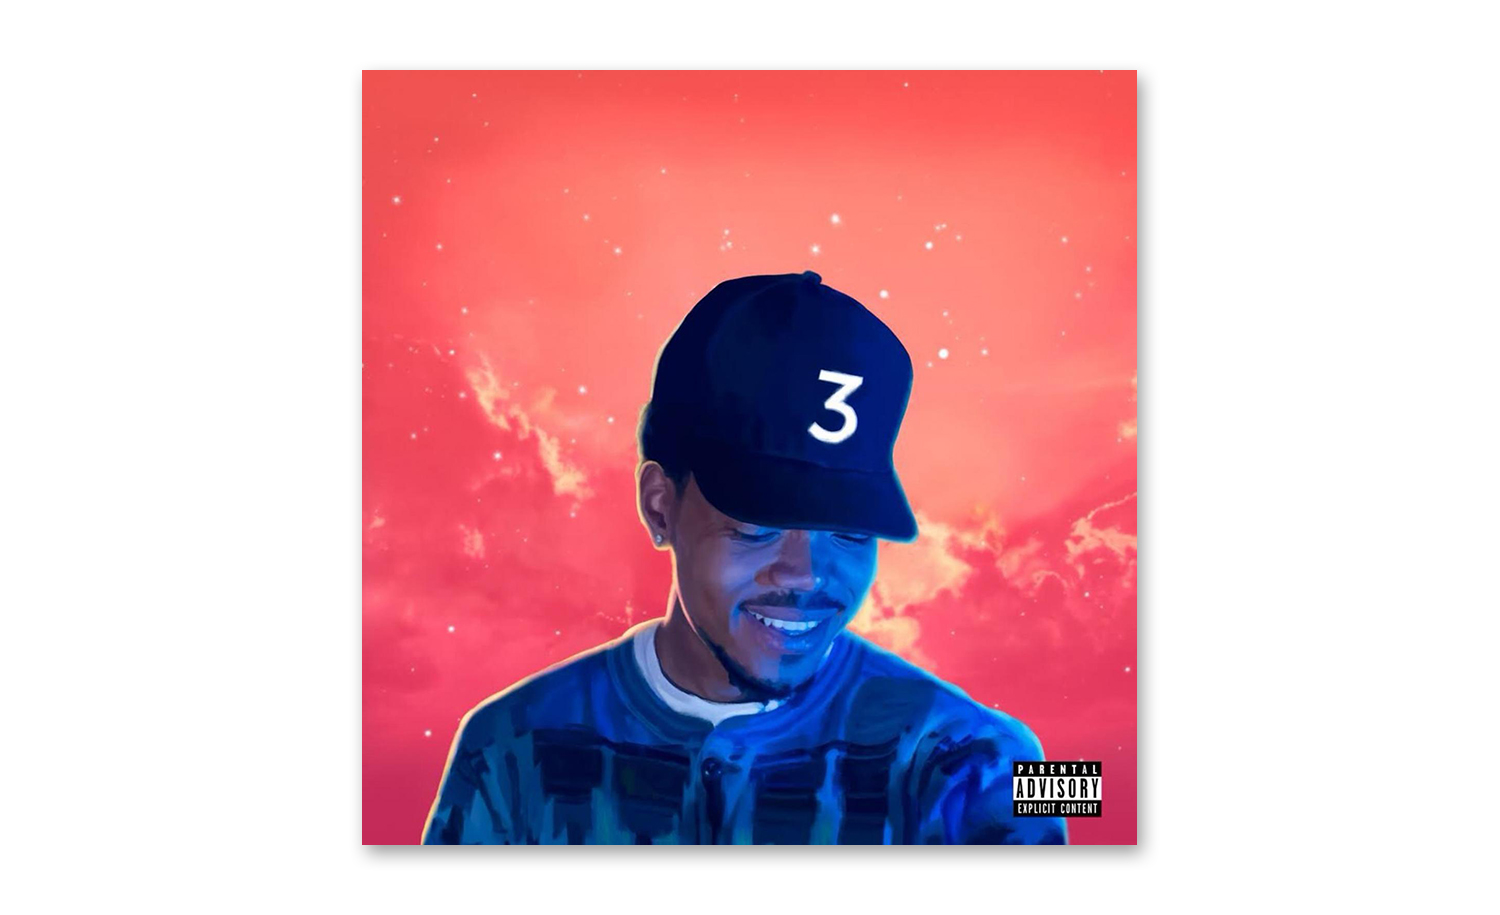 Chance The Rapper - "Coloring Book" (Release)